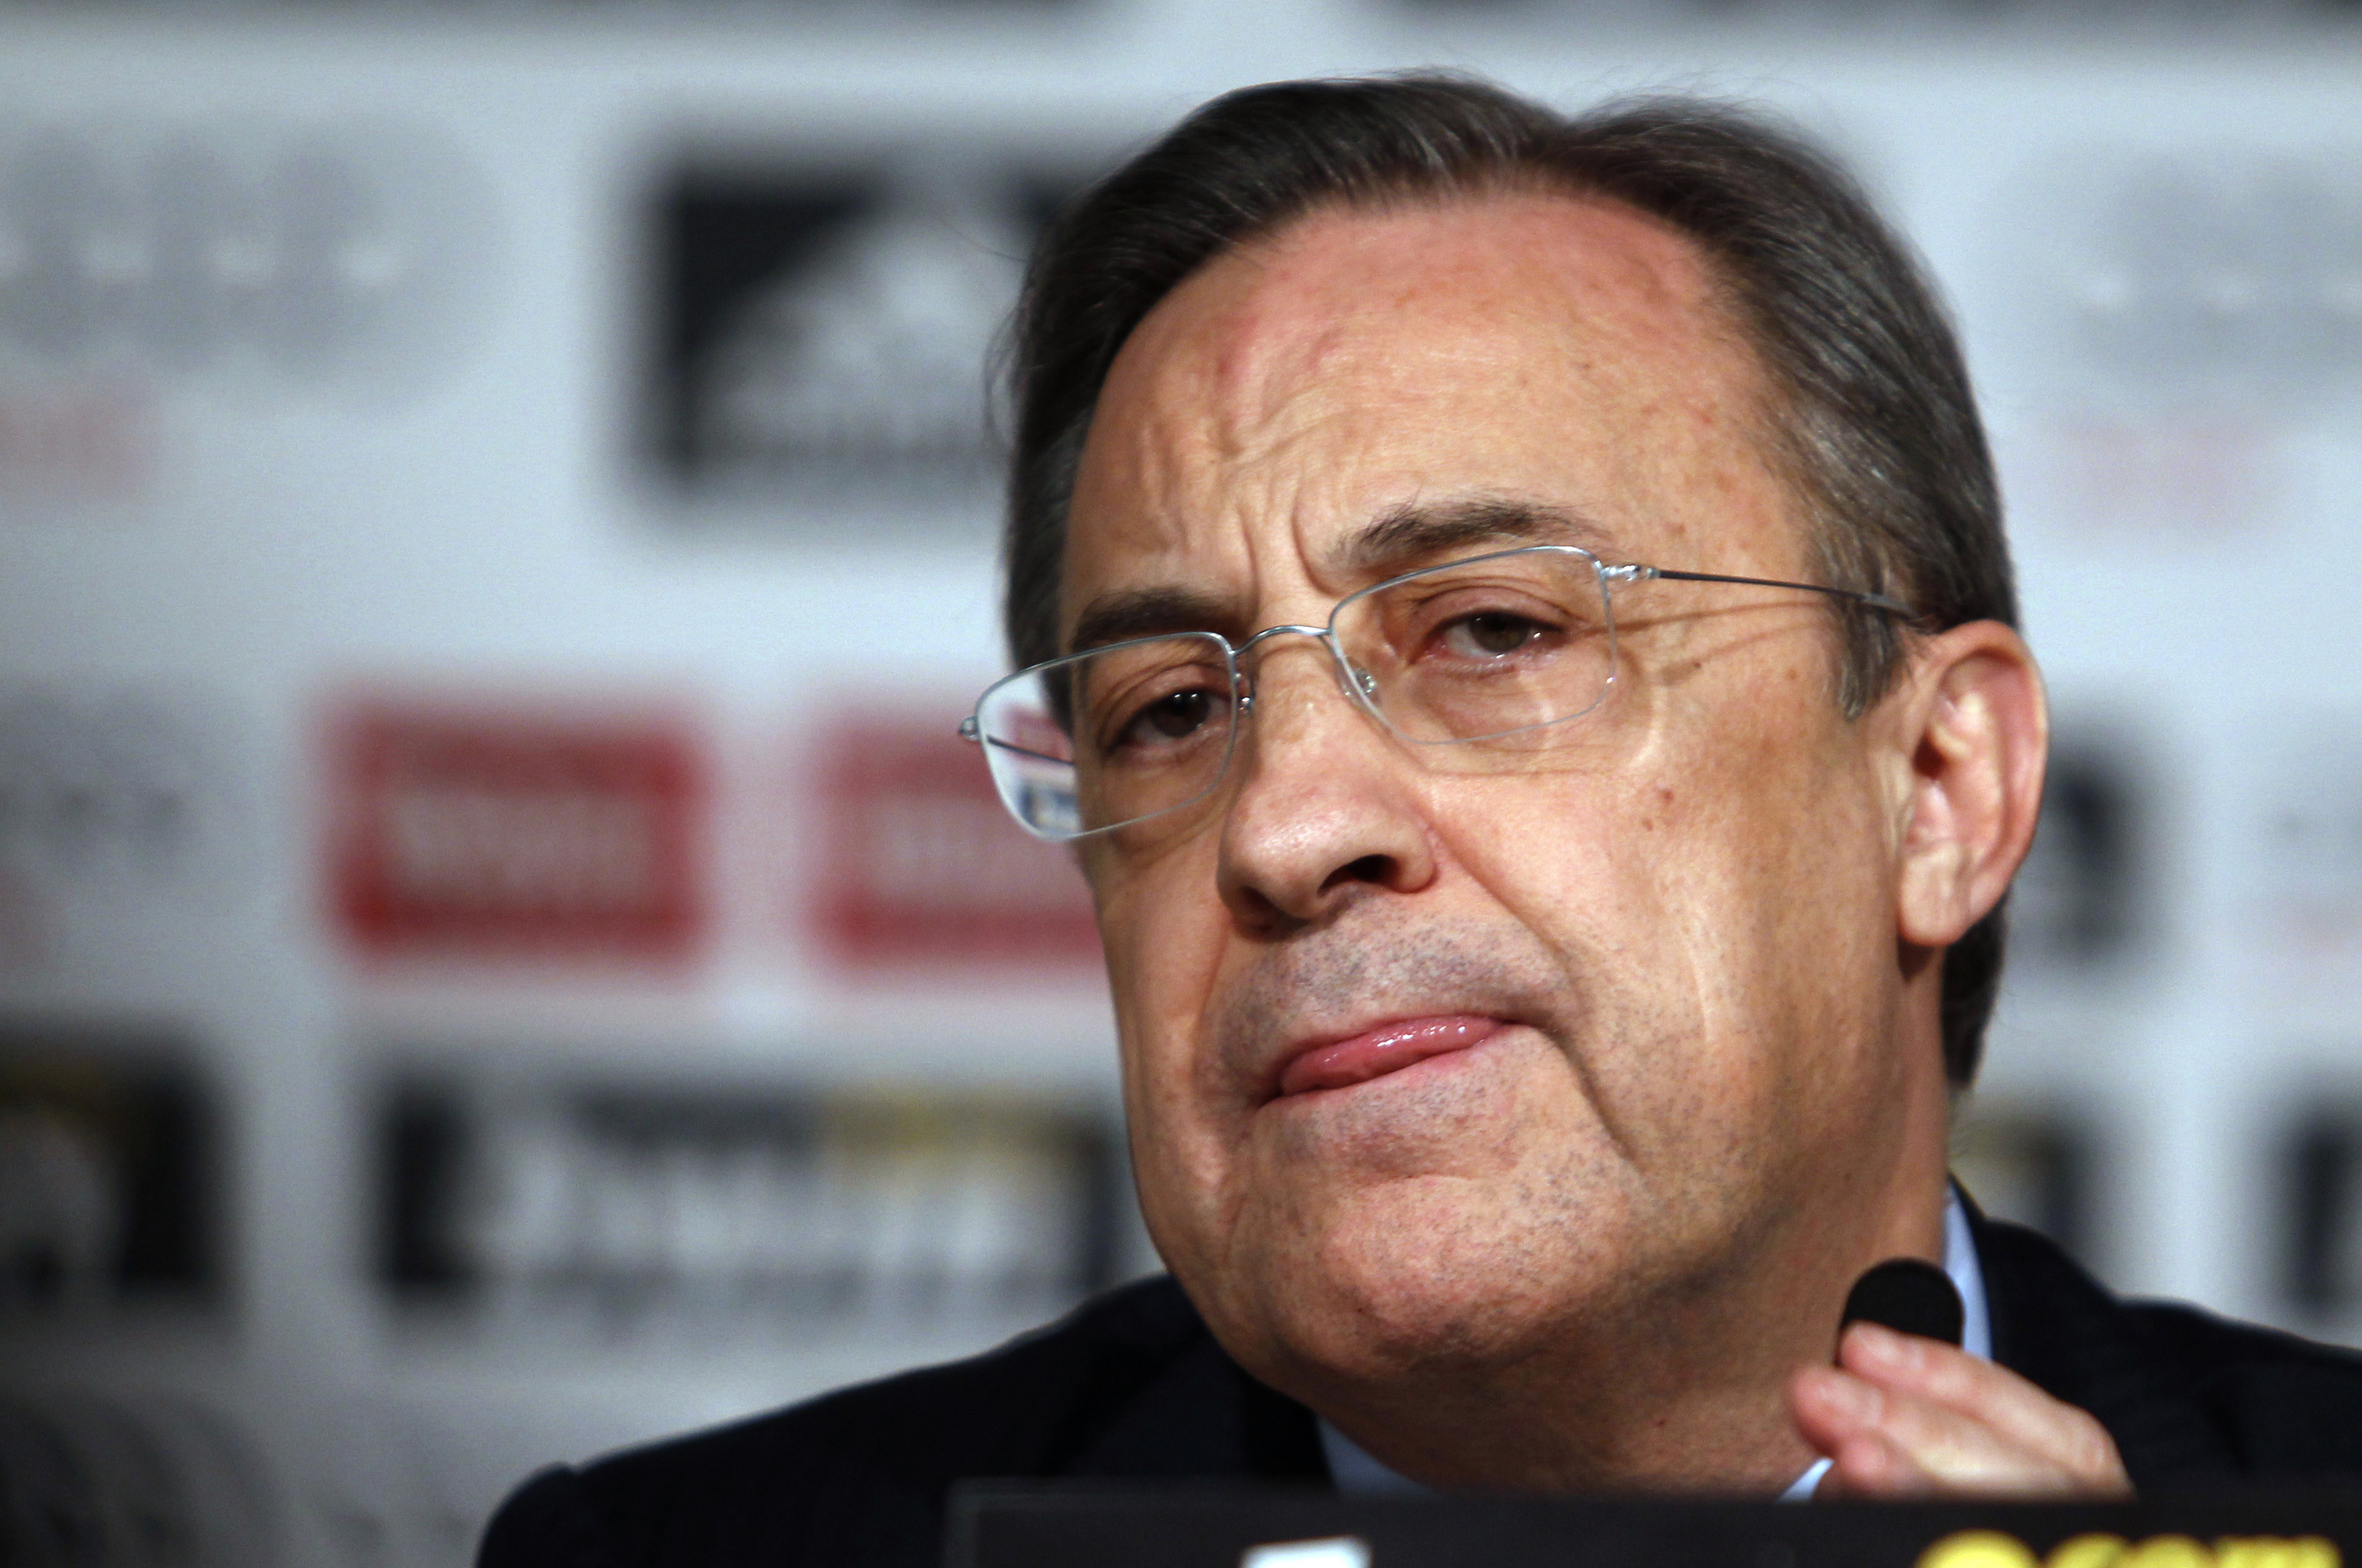 Real Madrid president Perez listens to a question at a news conference in Madrid